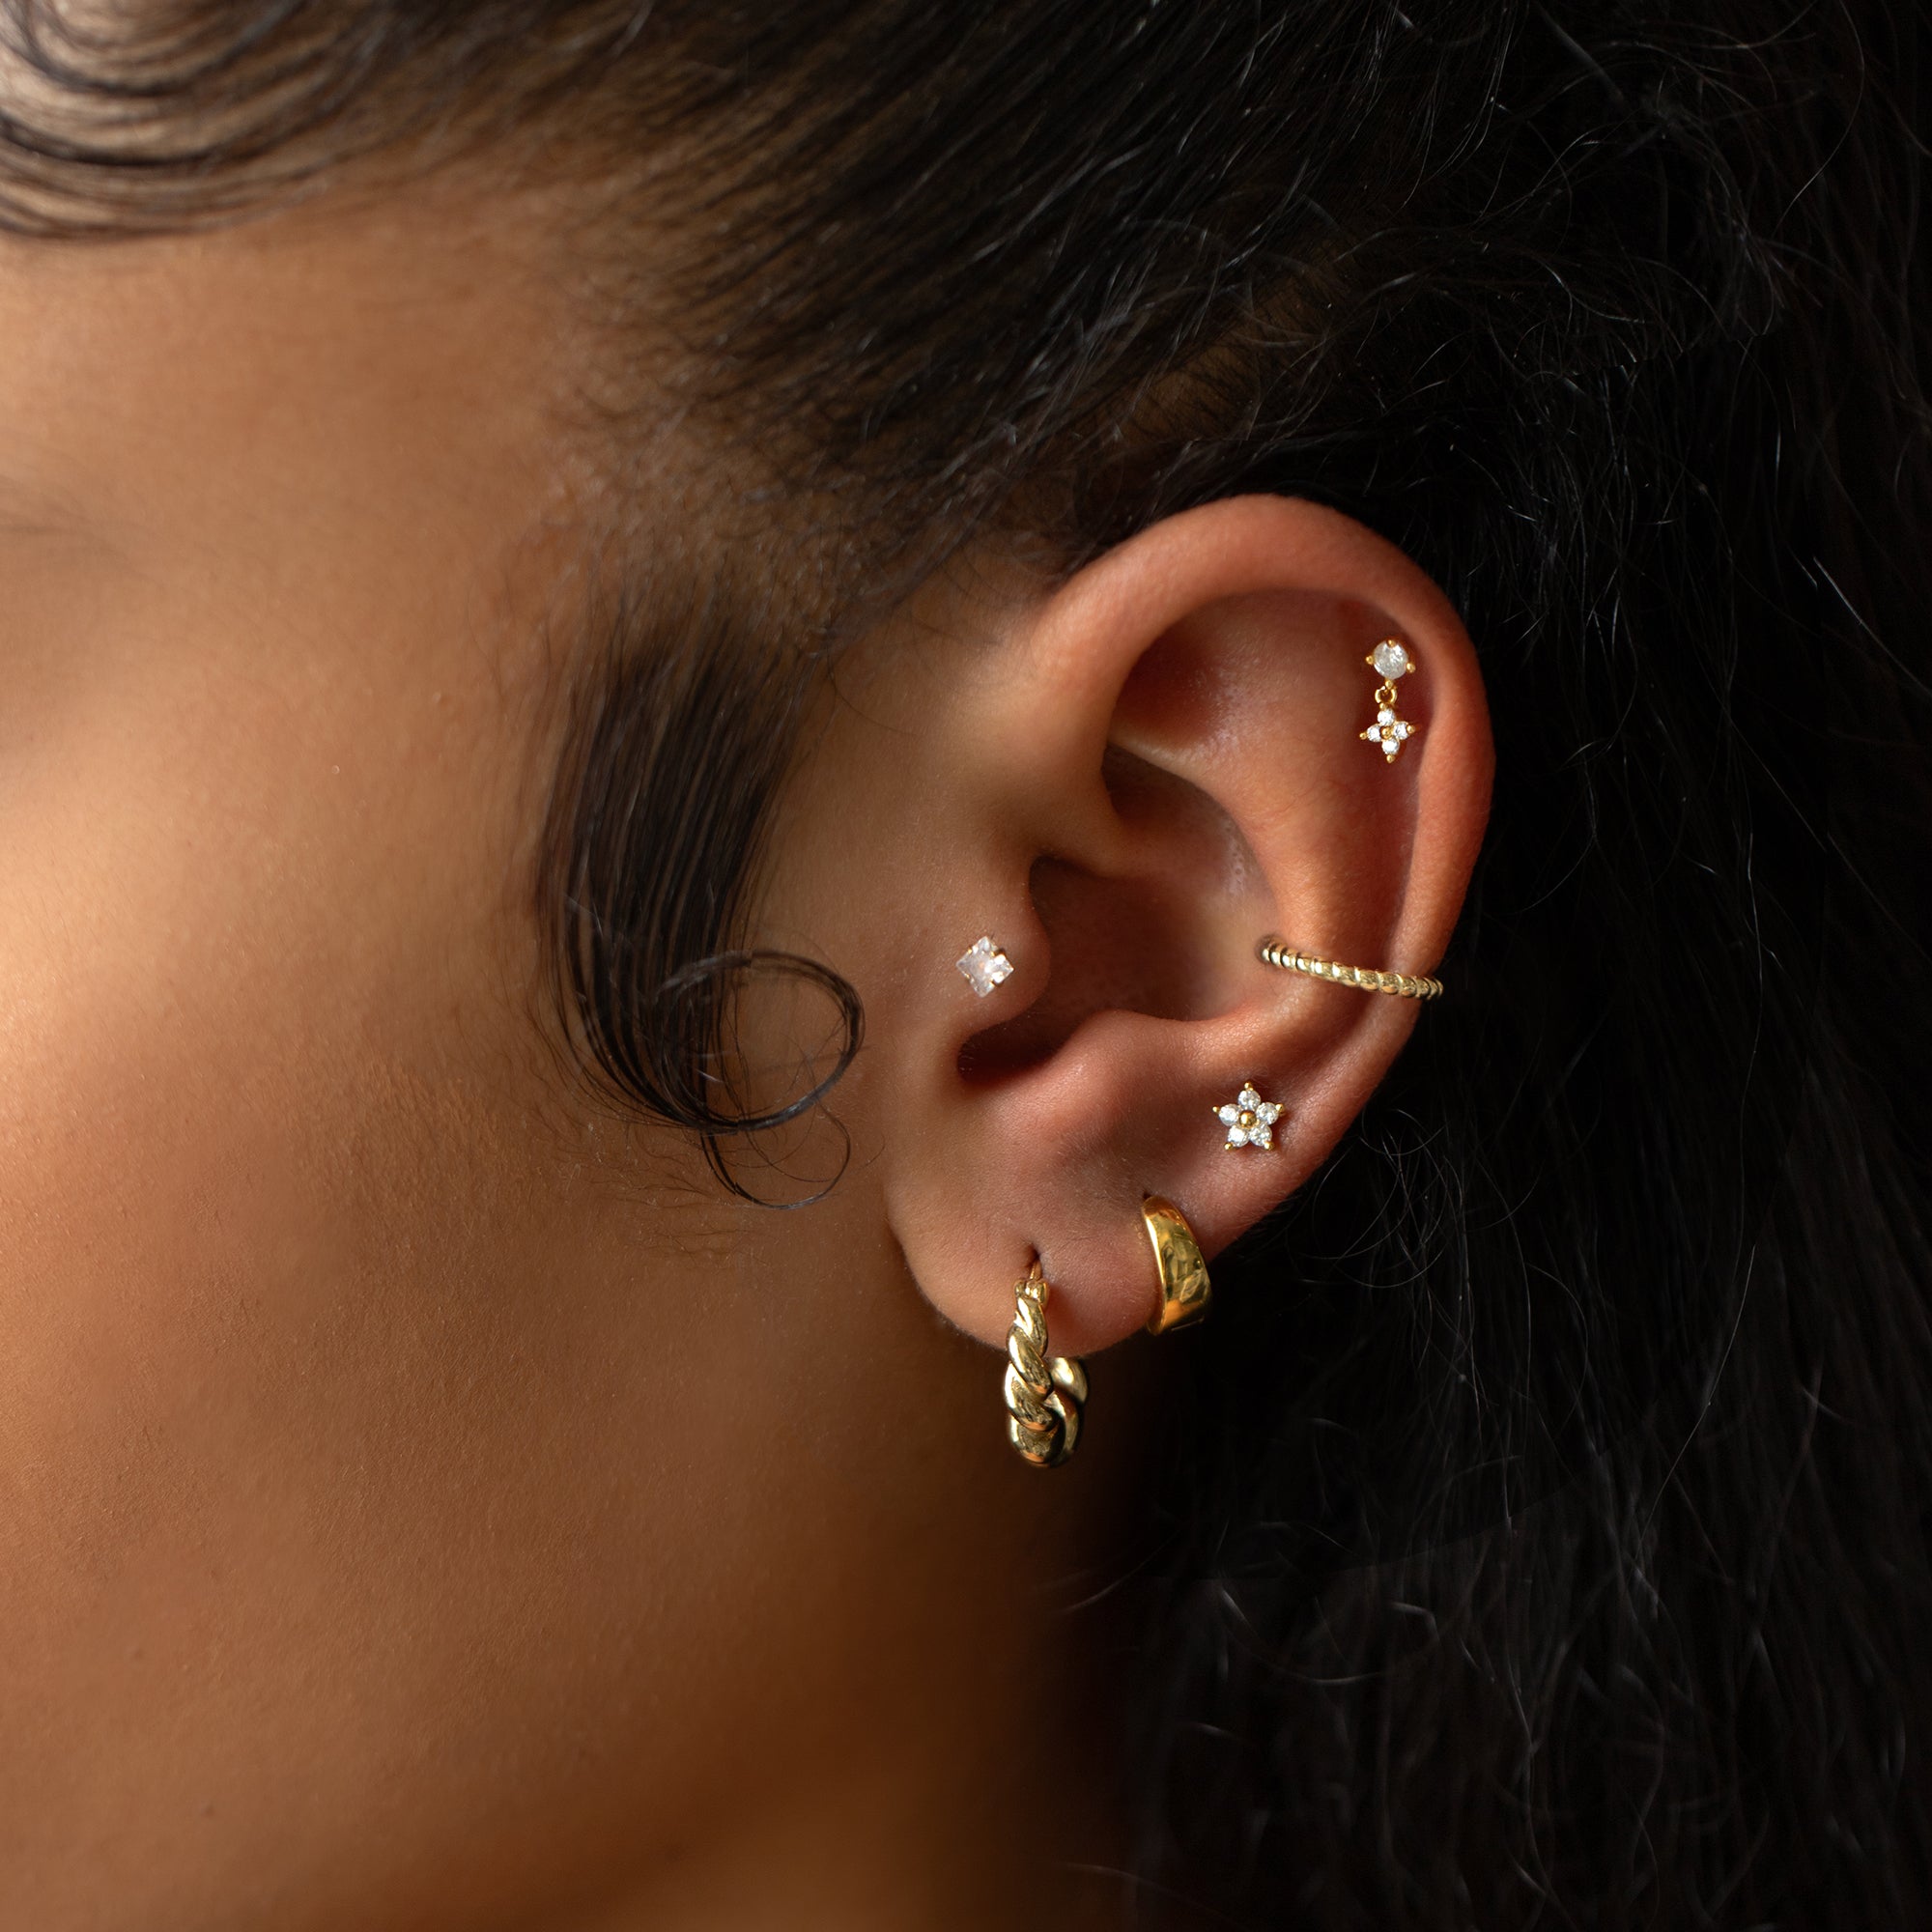 caption: Model wearing 6mm on second hole